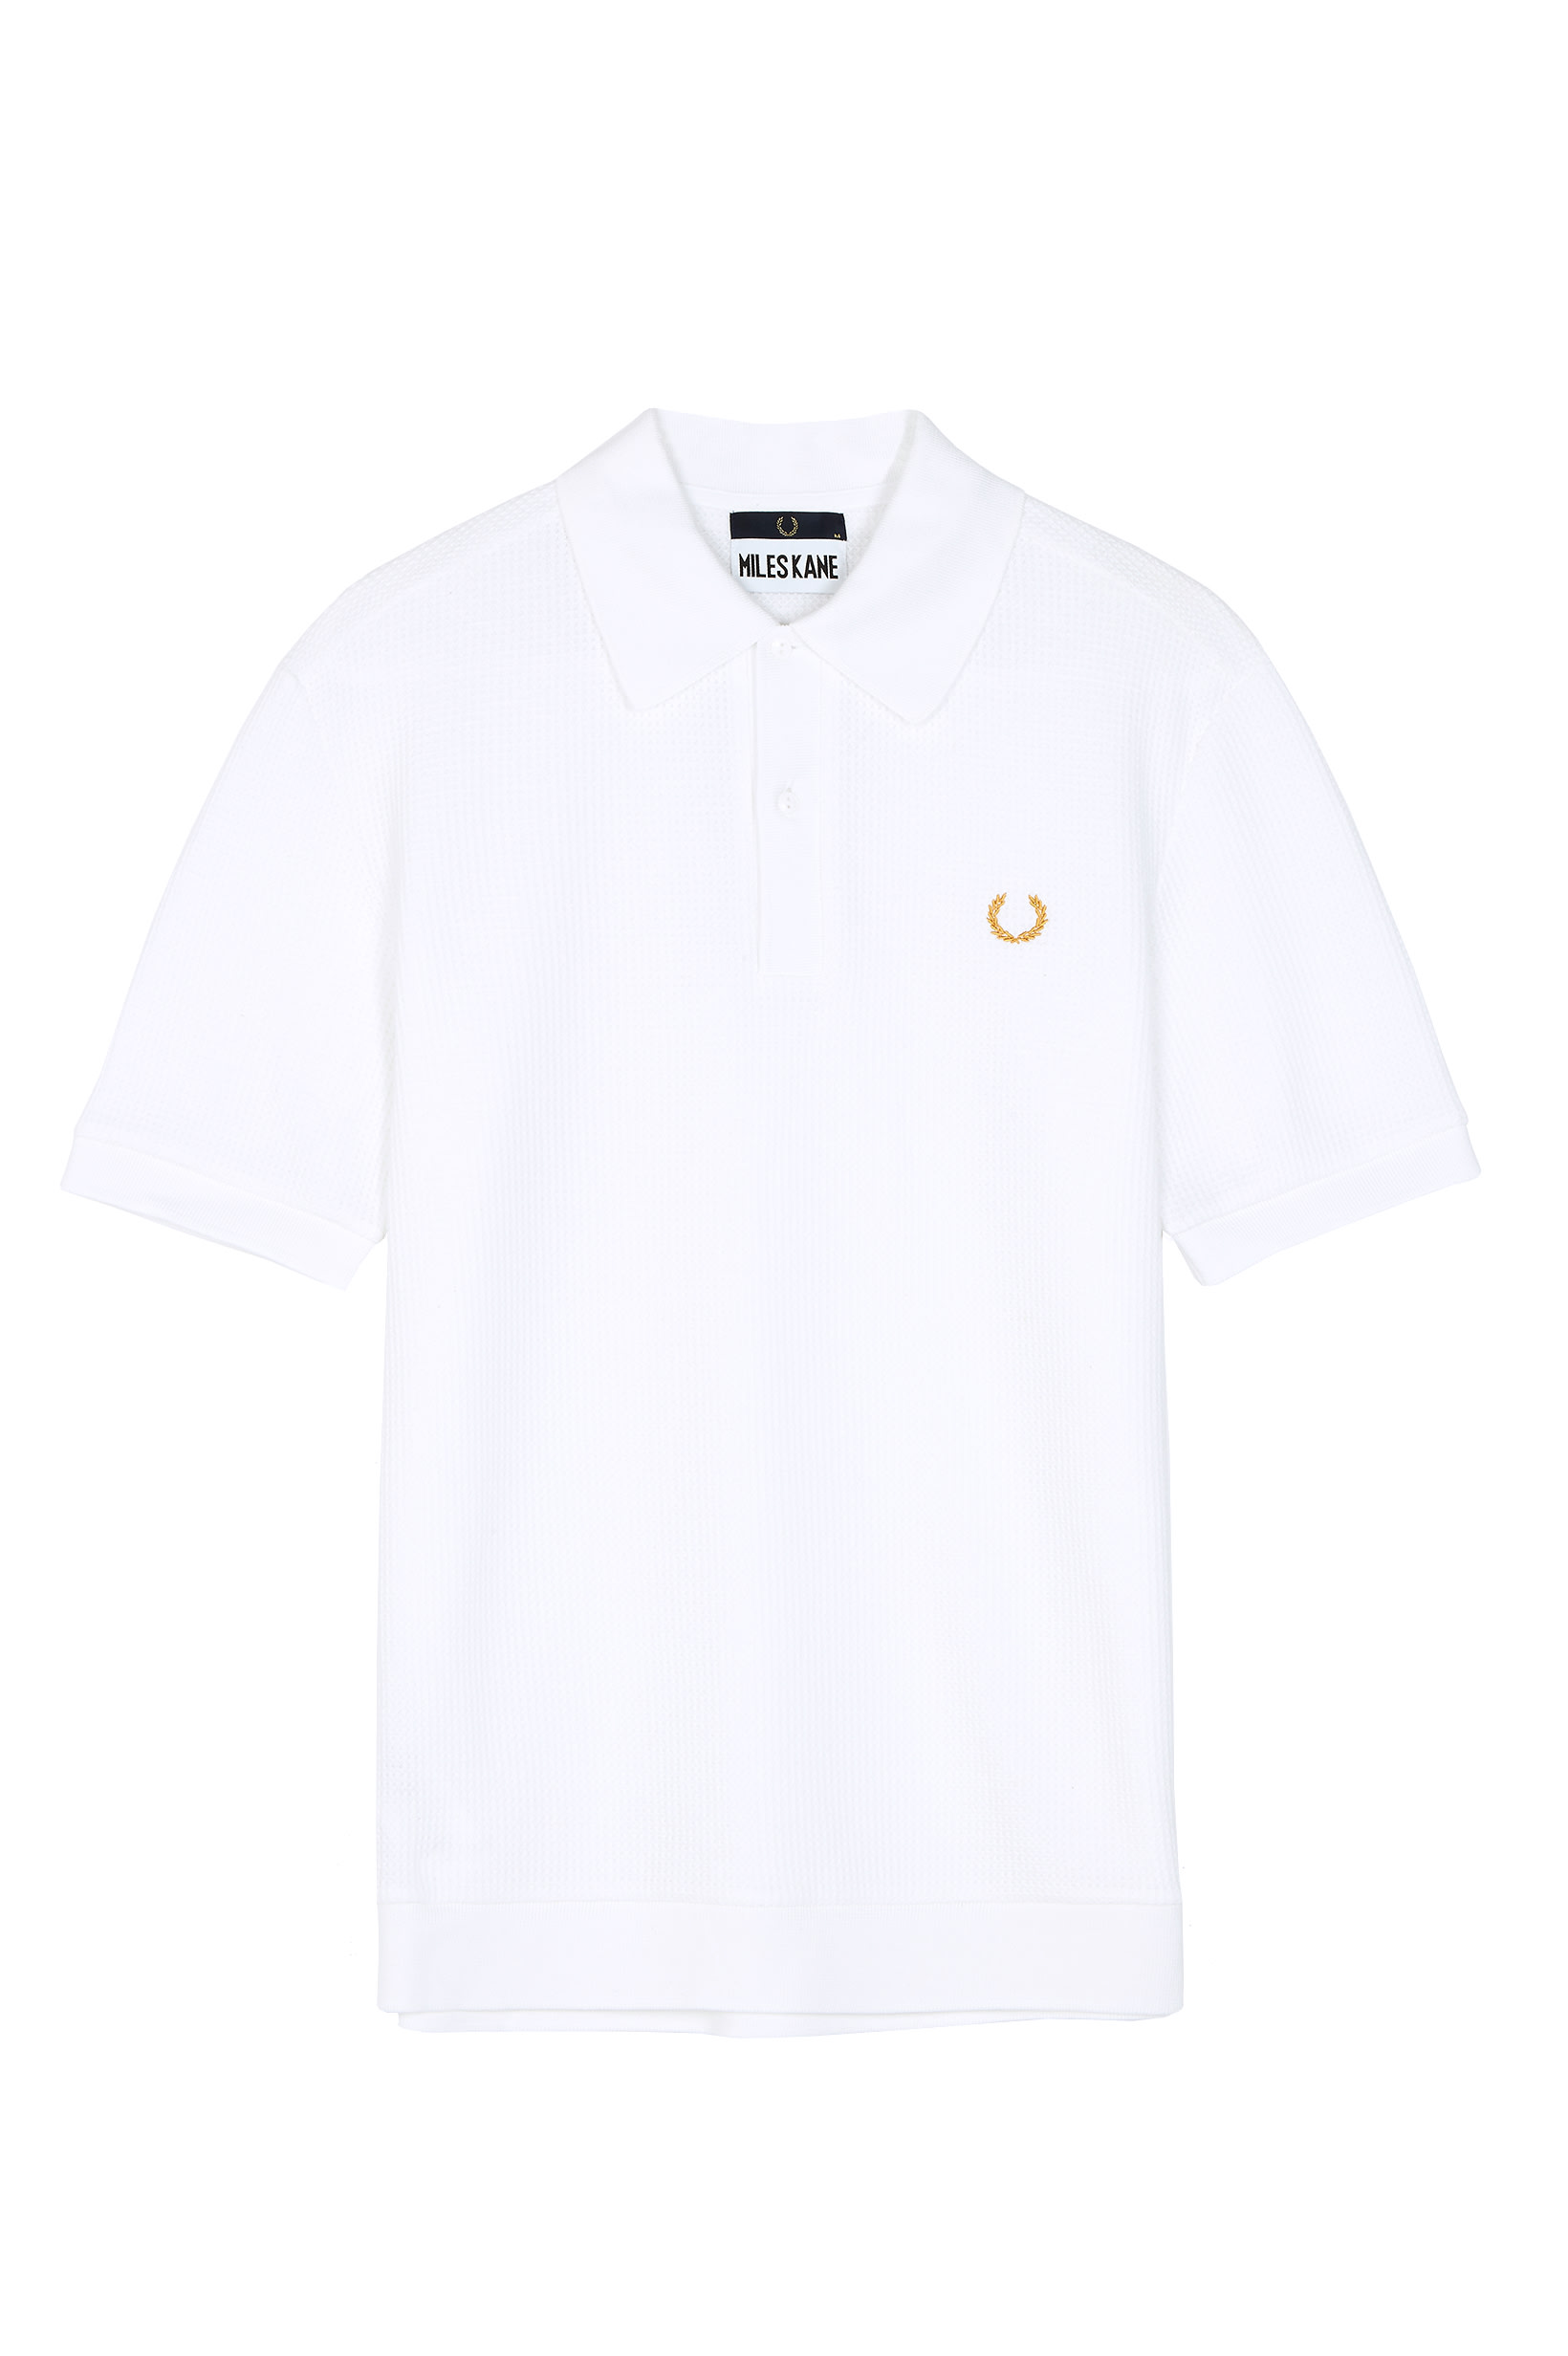 fredperrymiles11